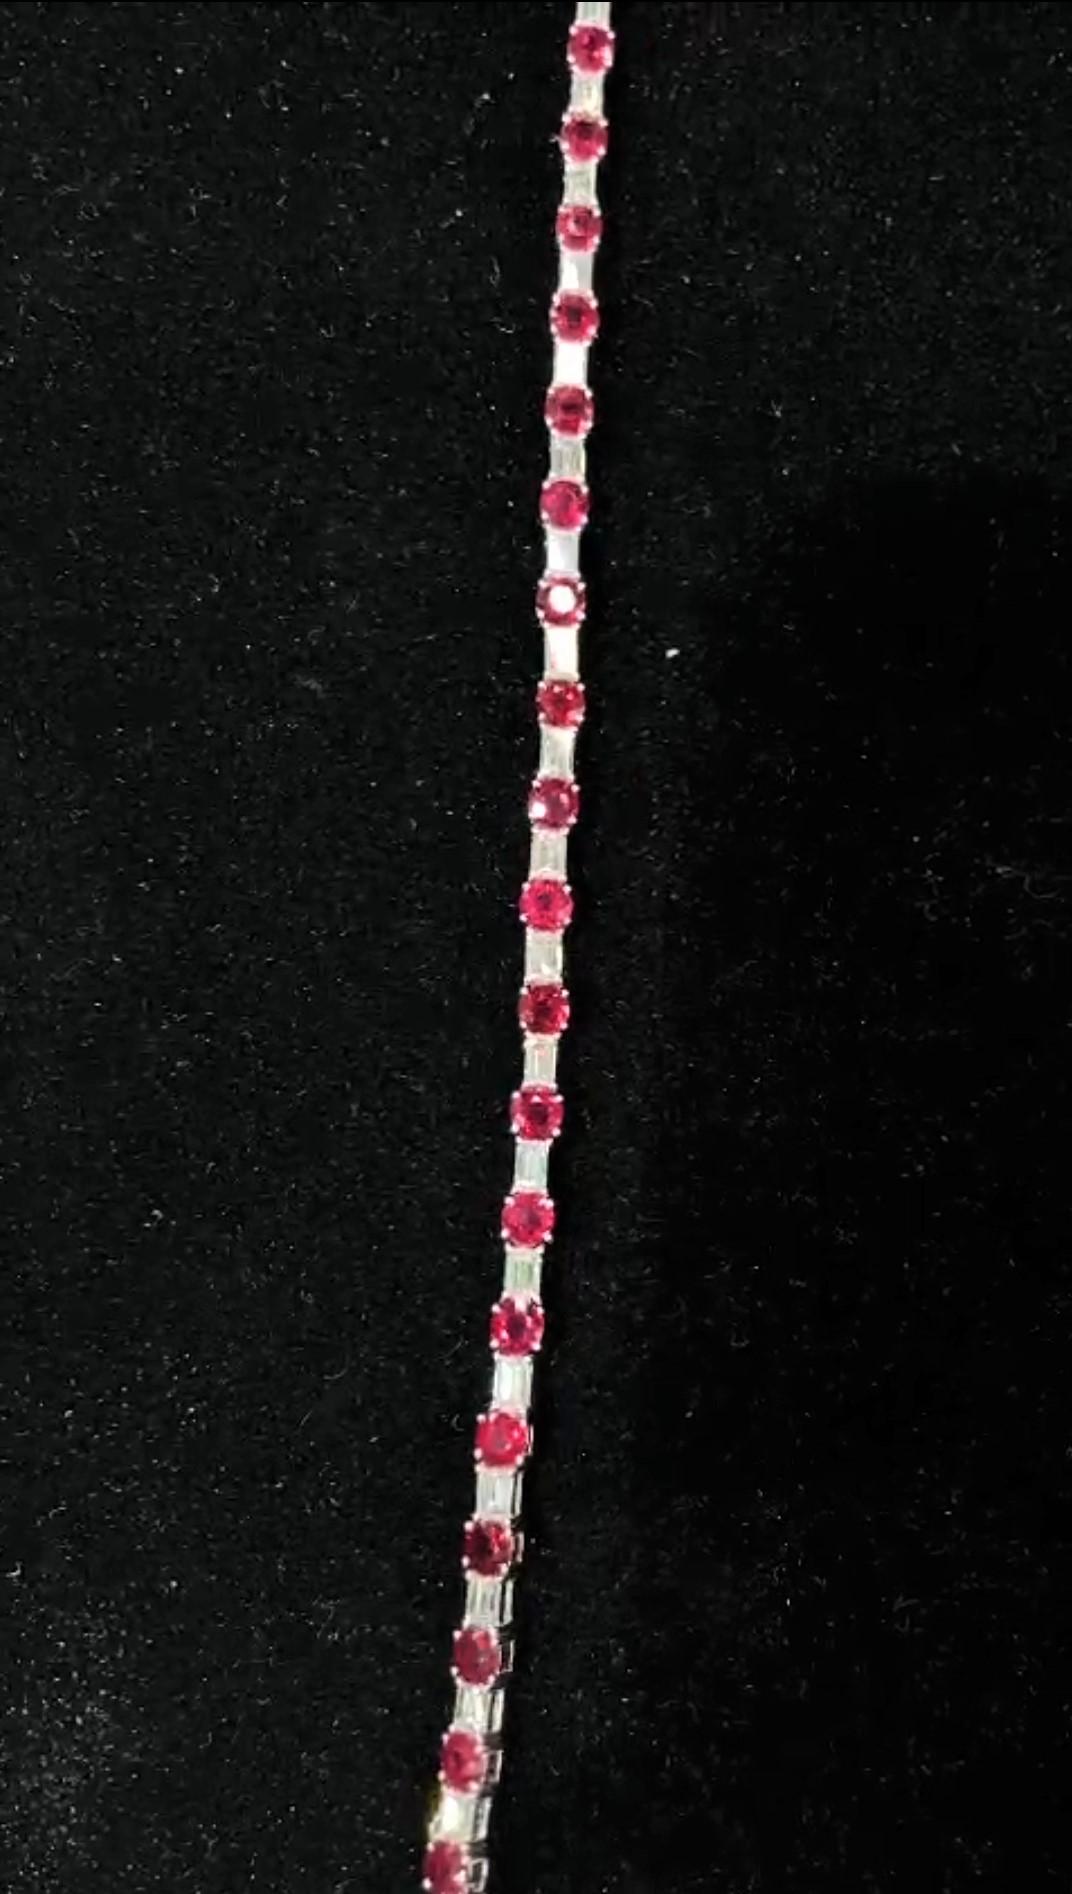 The Following Item we are offering is this Rare Important Radiant 18KT Gold Gorgeous Glittering and Sparkling Magnificent Fancy Rare Burmese Ruby and Diamond Tennis Bracelet. Bracelet contains over 11CTS of Beautiful Fancy Burmese Rubies and Large